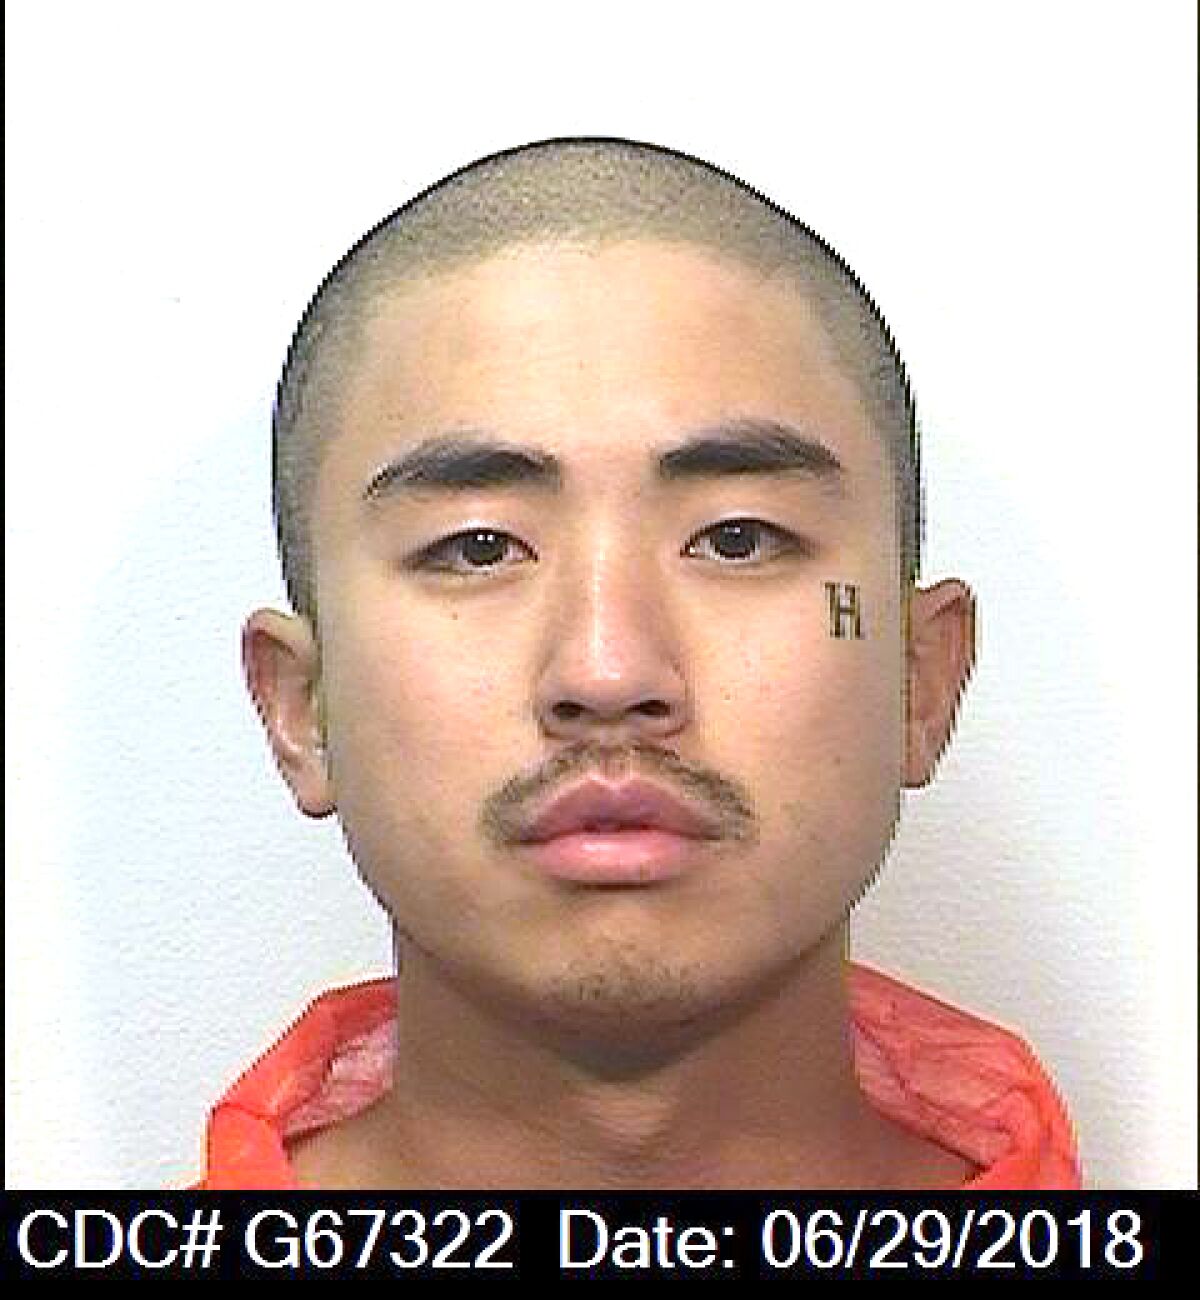 A mug shot of a man in an orange prison jumpsuit, with a tattoo of an H near his left eye